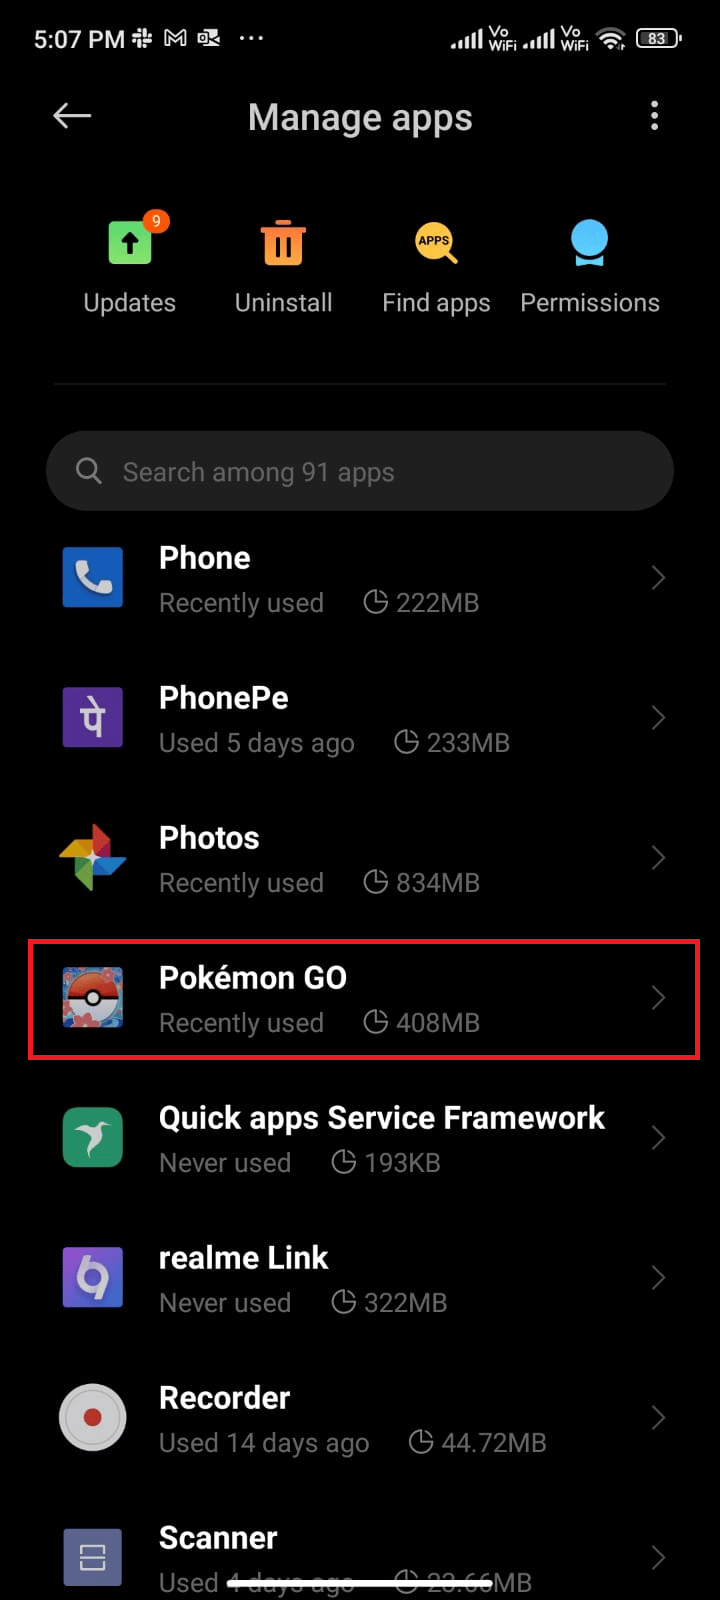 tap on Manage apps and then Pokémon Go